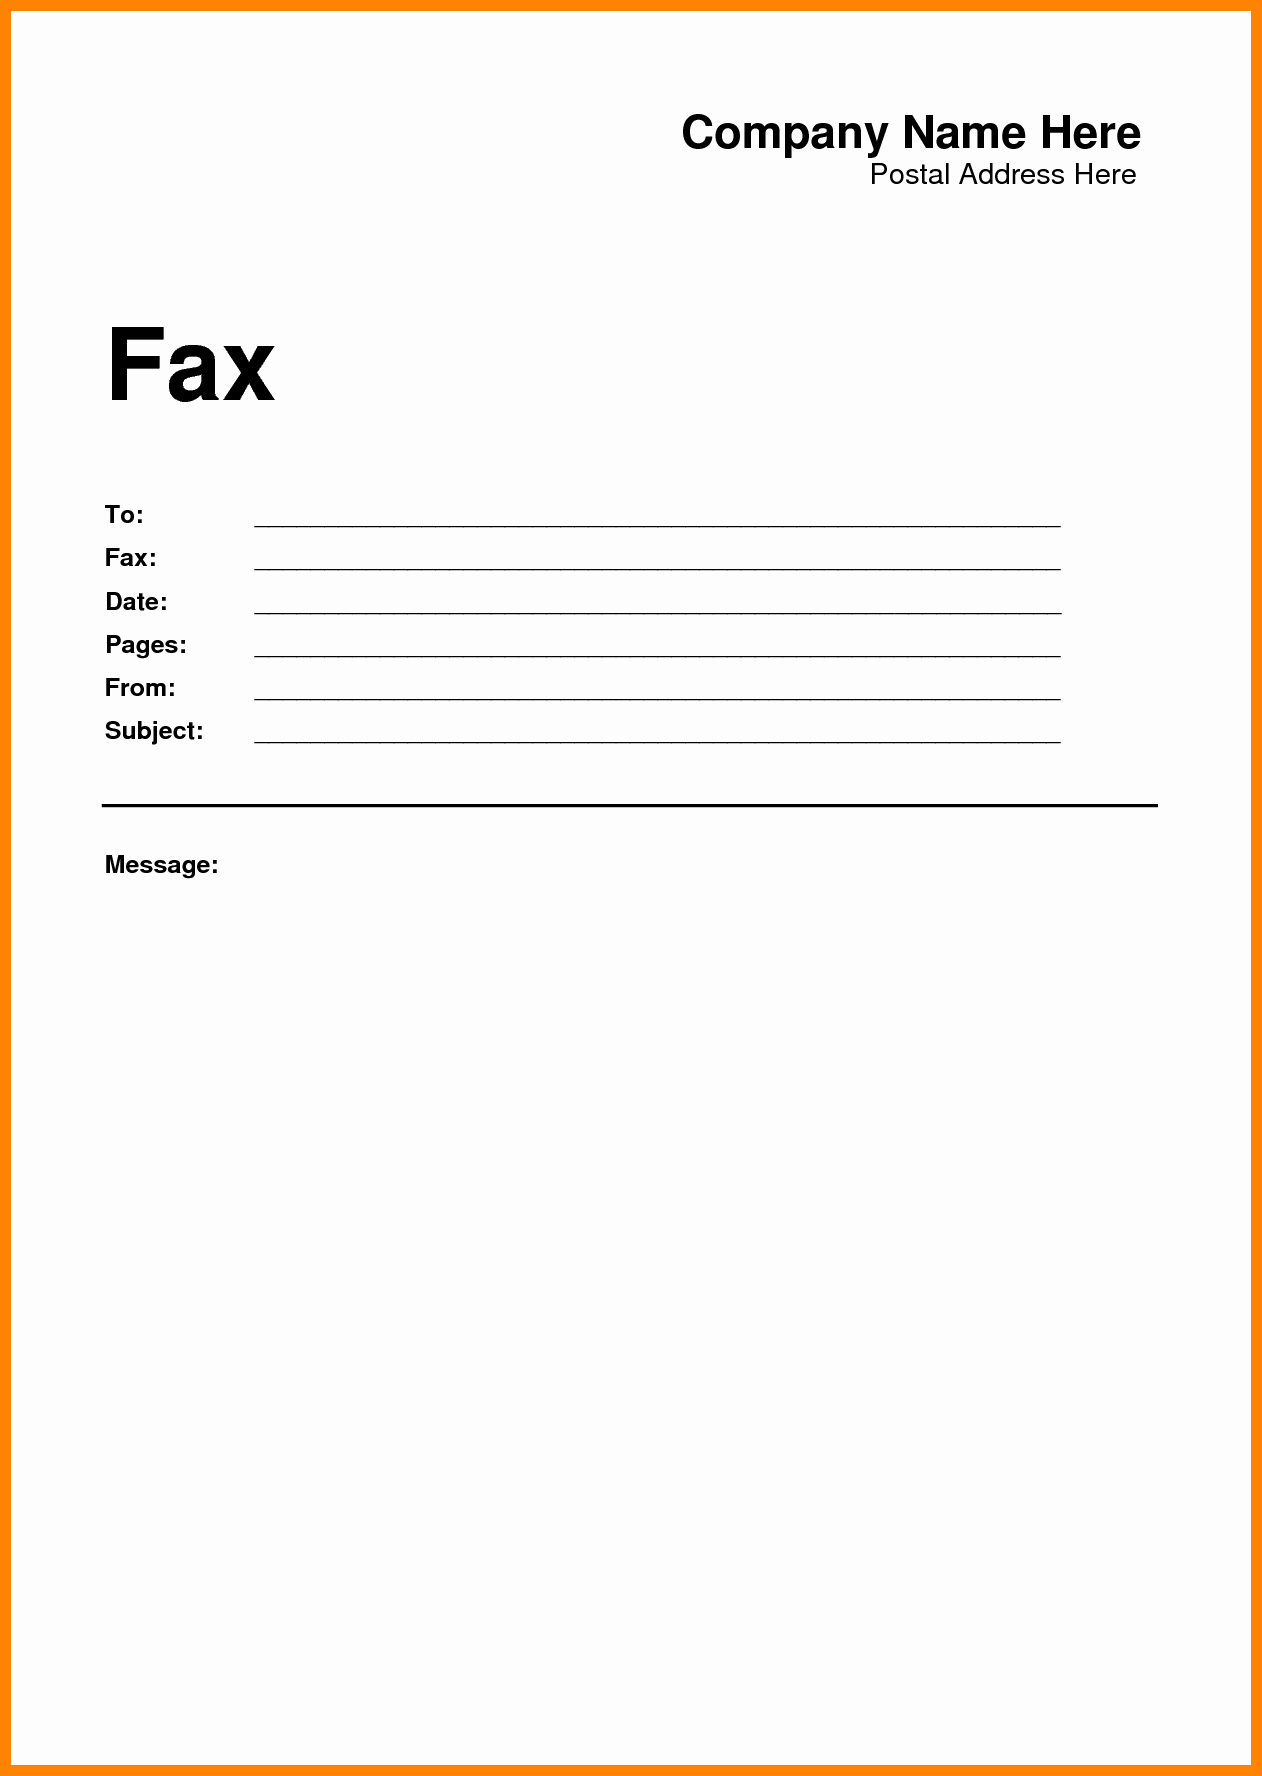 Free Downloads Fax Cover Sheet Unique 6 Free Fax Cover Sheet